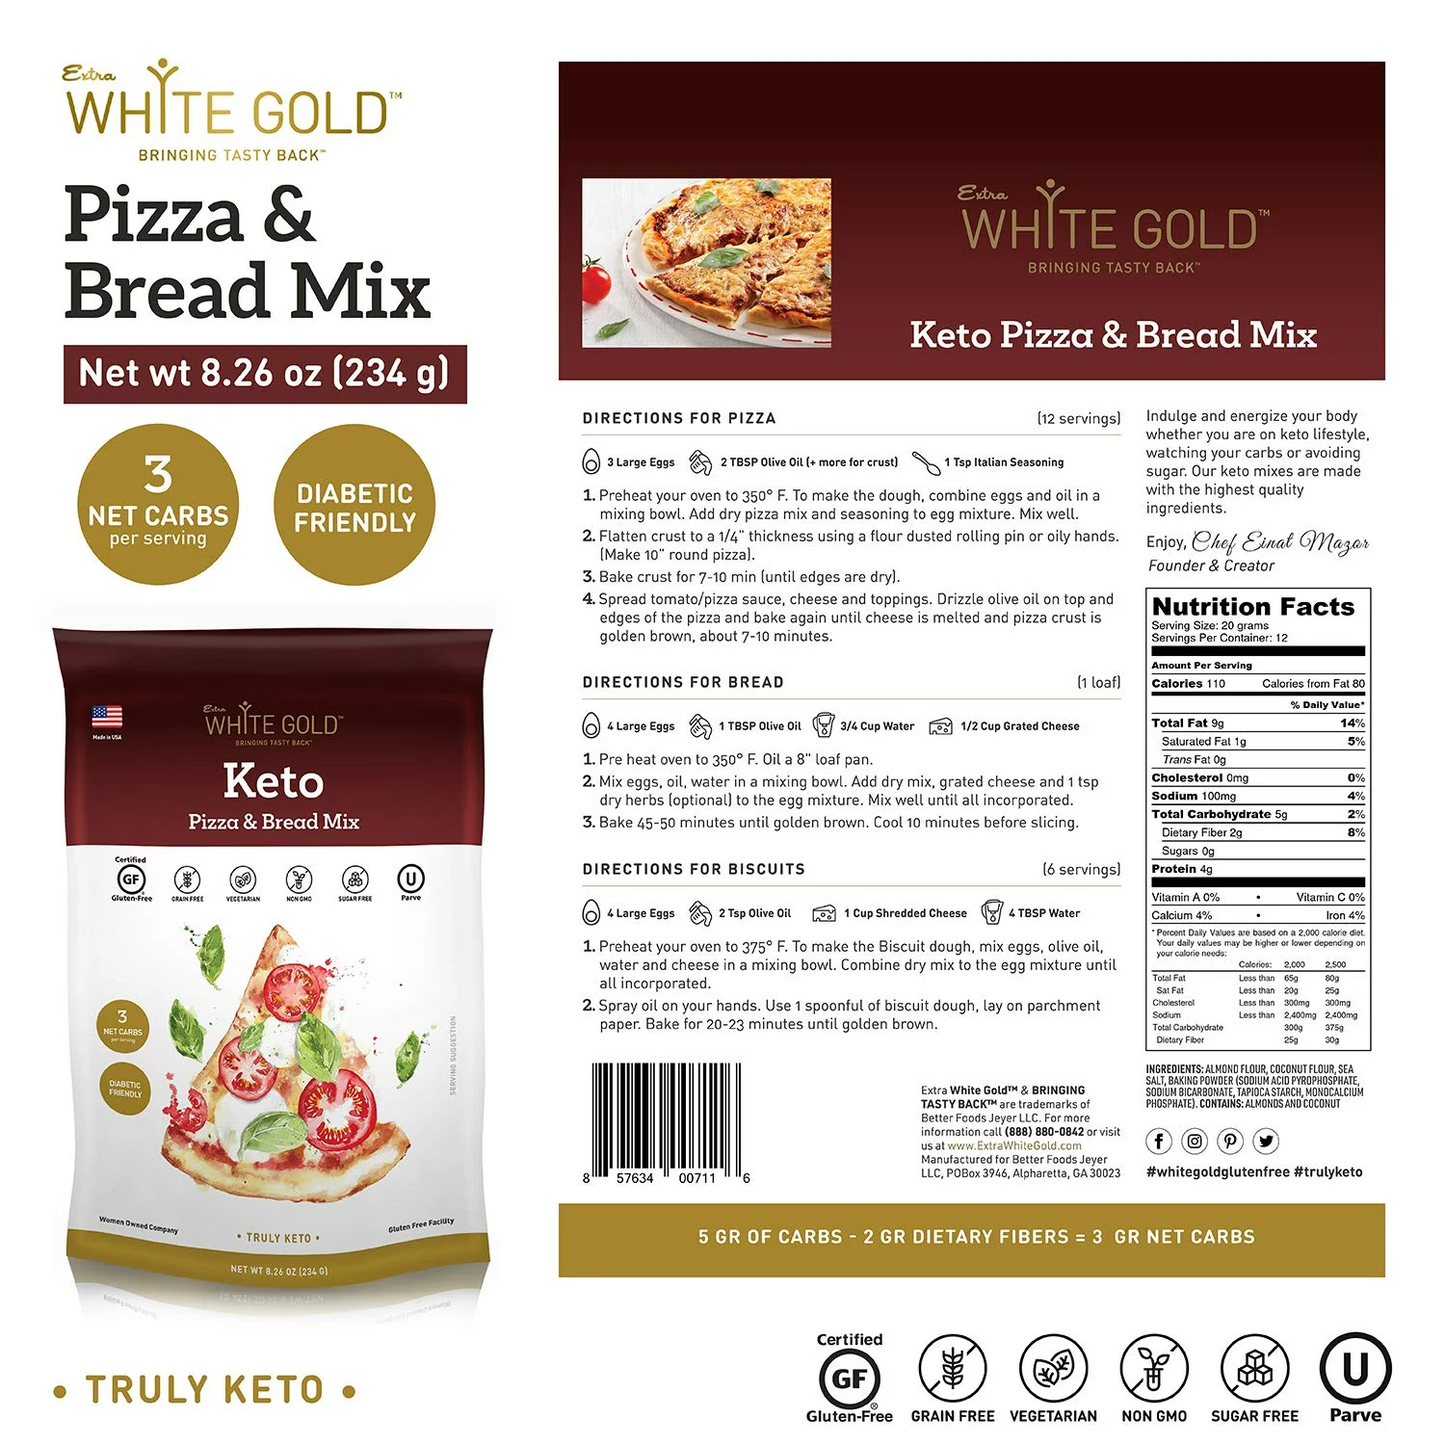 Extra White Gold Pizza, Bread and Biscuit Mix, Keto Baking Mix, Low carb Pizza mix, No sugar added, Gluten Free, Grain Free, Wheat Free, Diabetic, Atkins and WW Friendly (3g net carbs, 12 Servings)